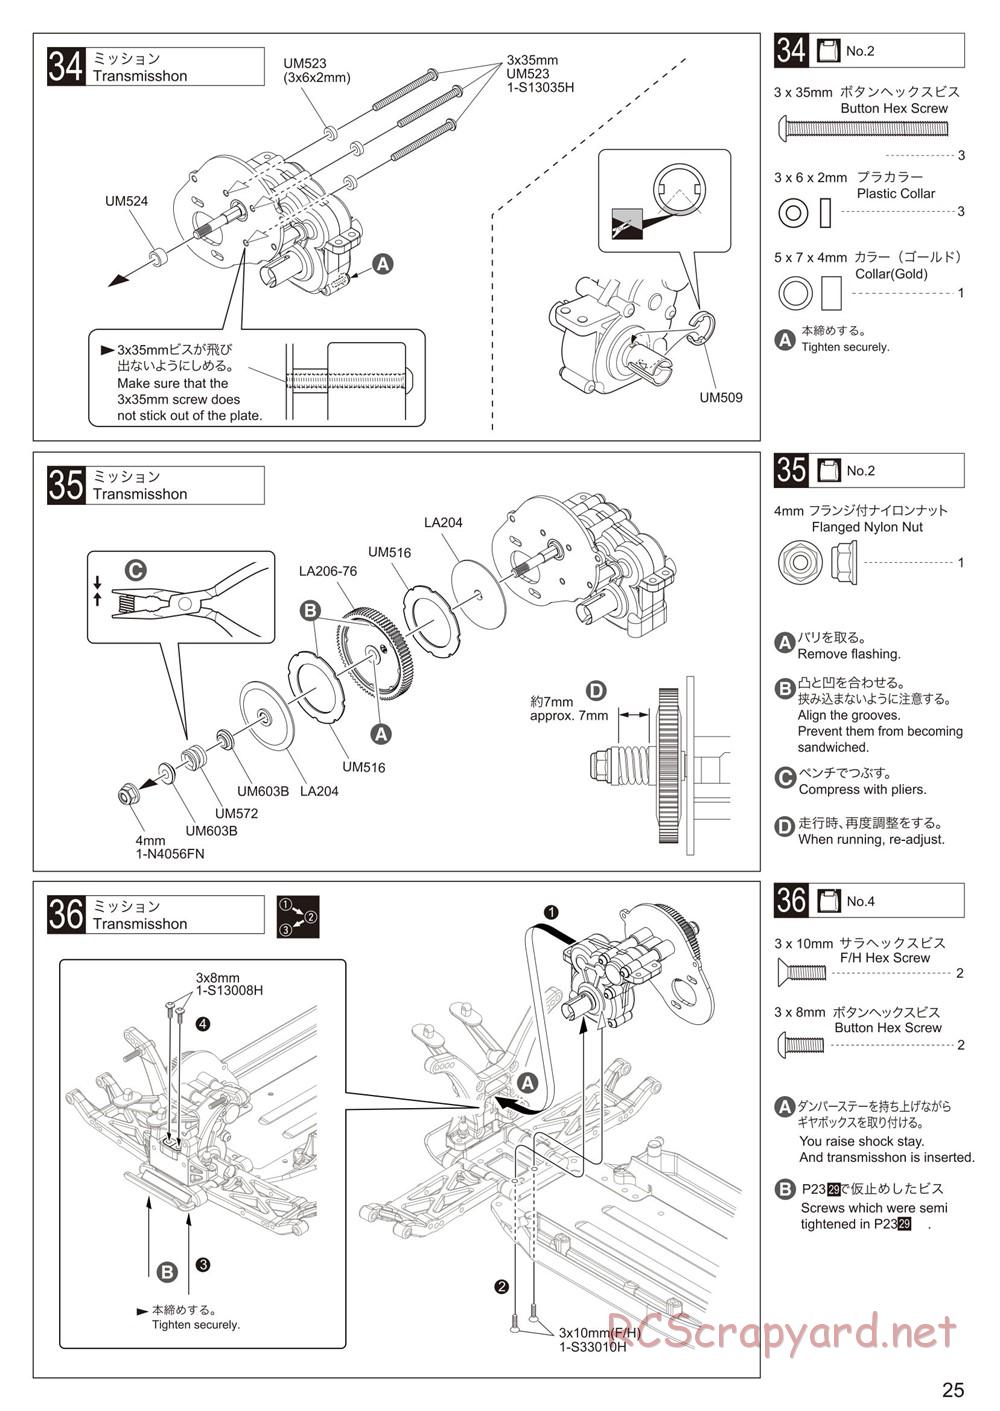 Kyosho - Ultima RB6 (2015) - Manual - Page 25